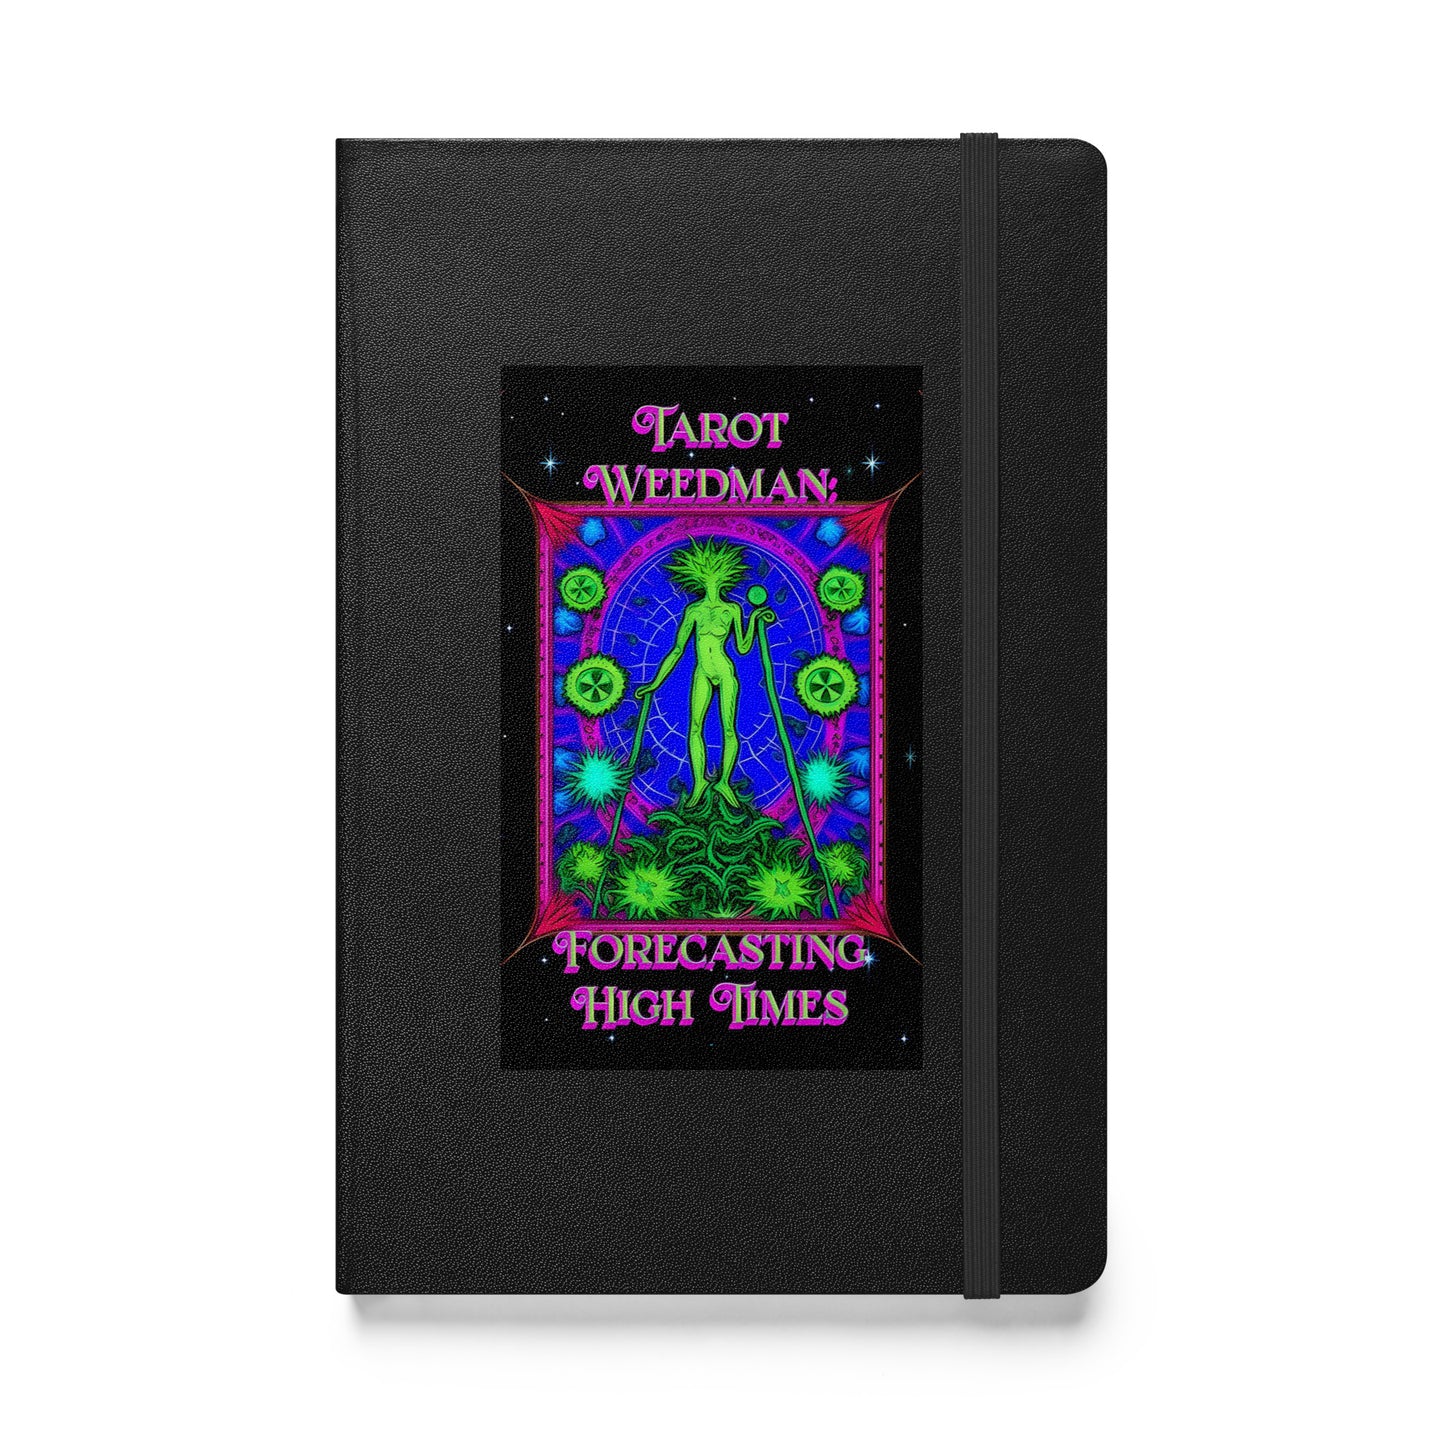 Tarot Weedman: Forecasting High Times Hardcover Bound Notebook